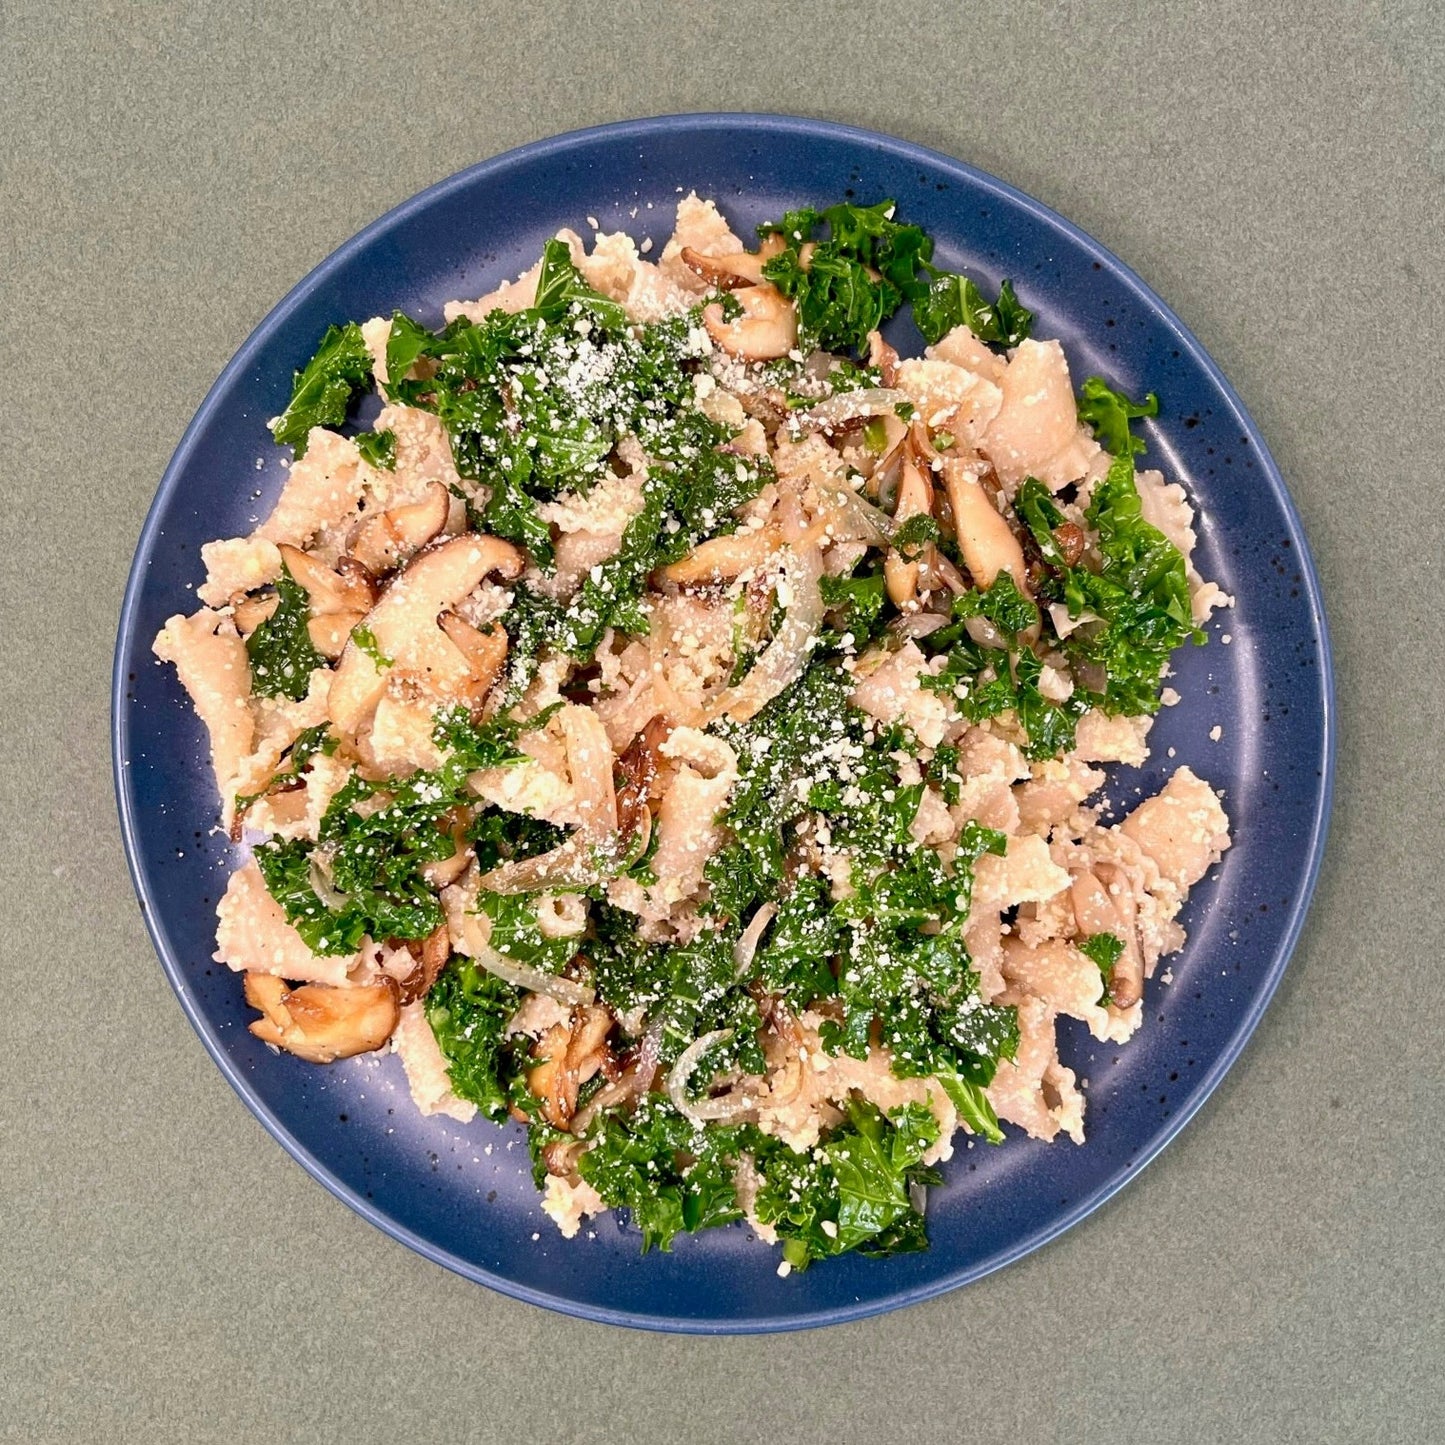 Fall Campanelle Pasta with Mushrooms, Kale, and Parmesan